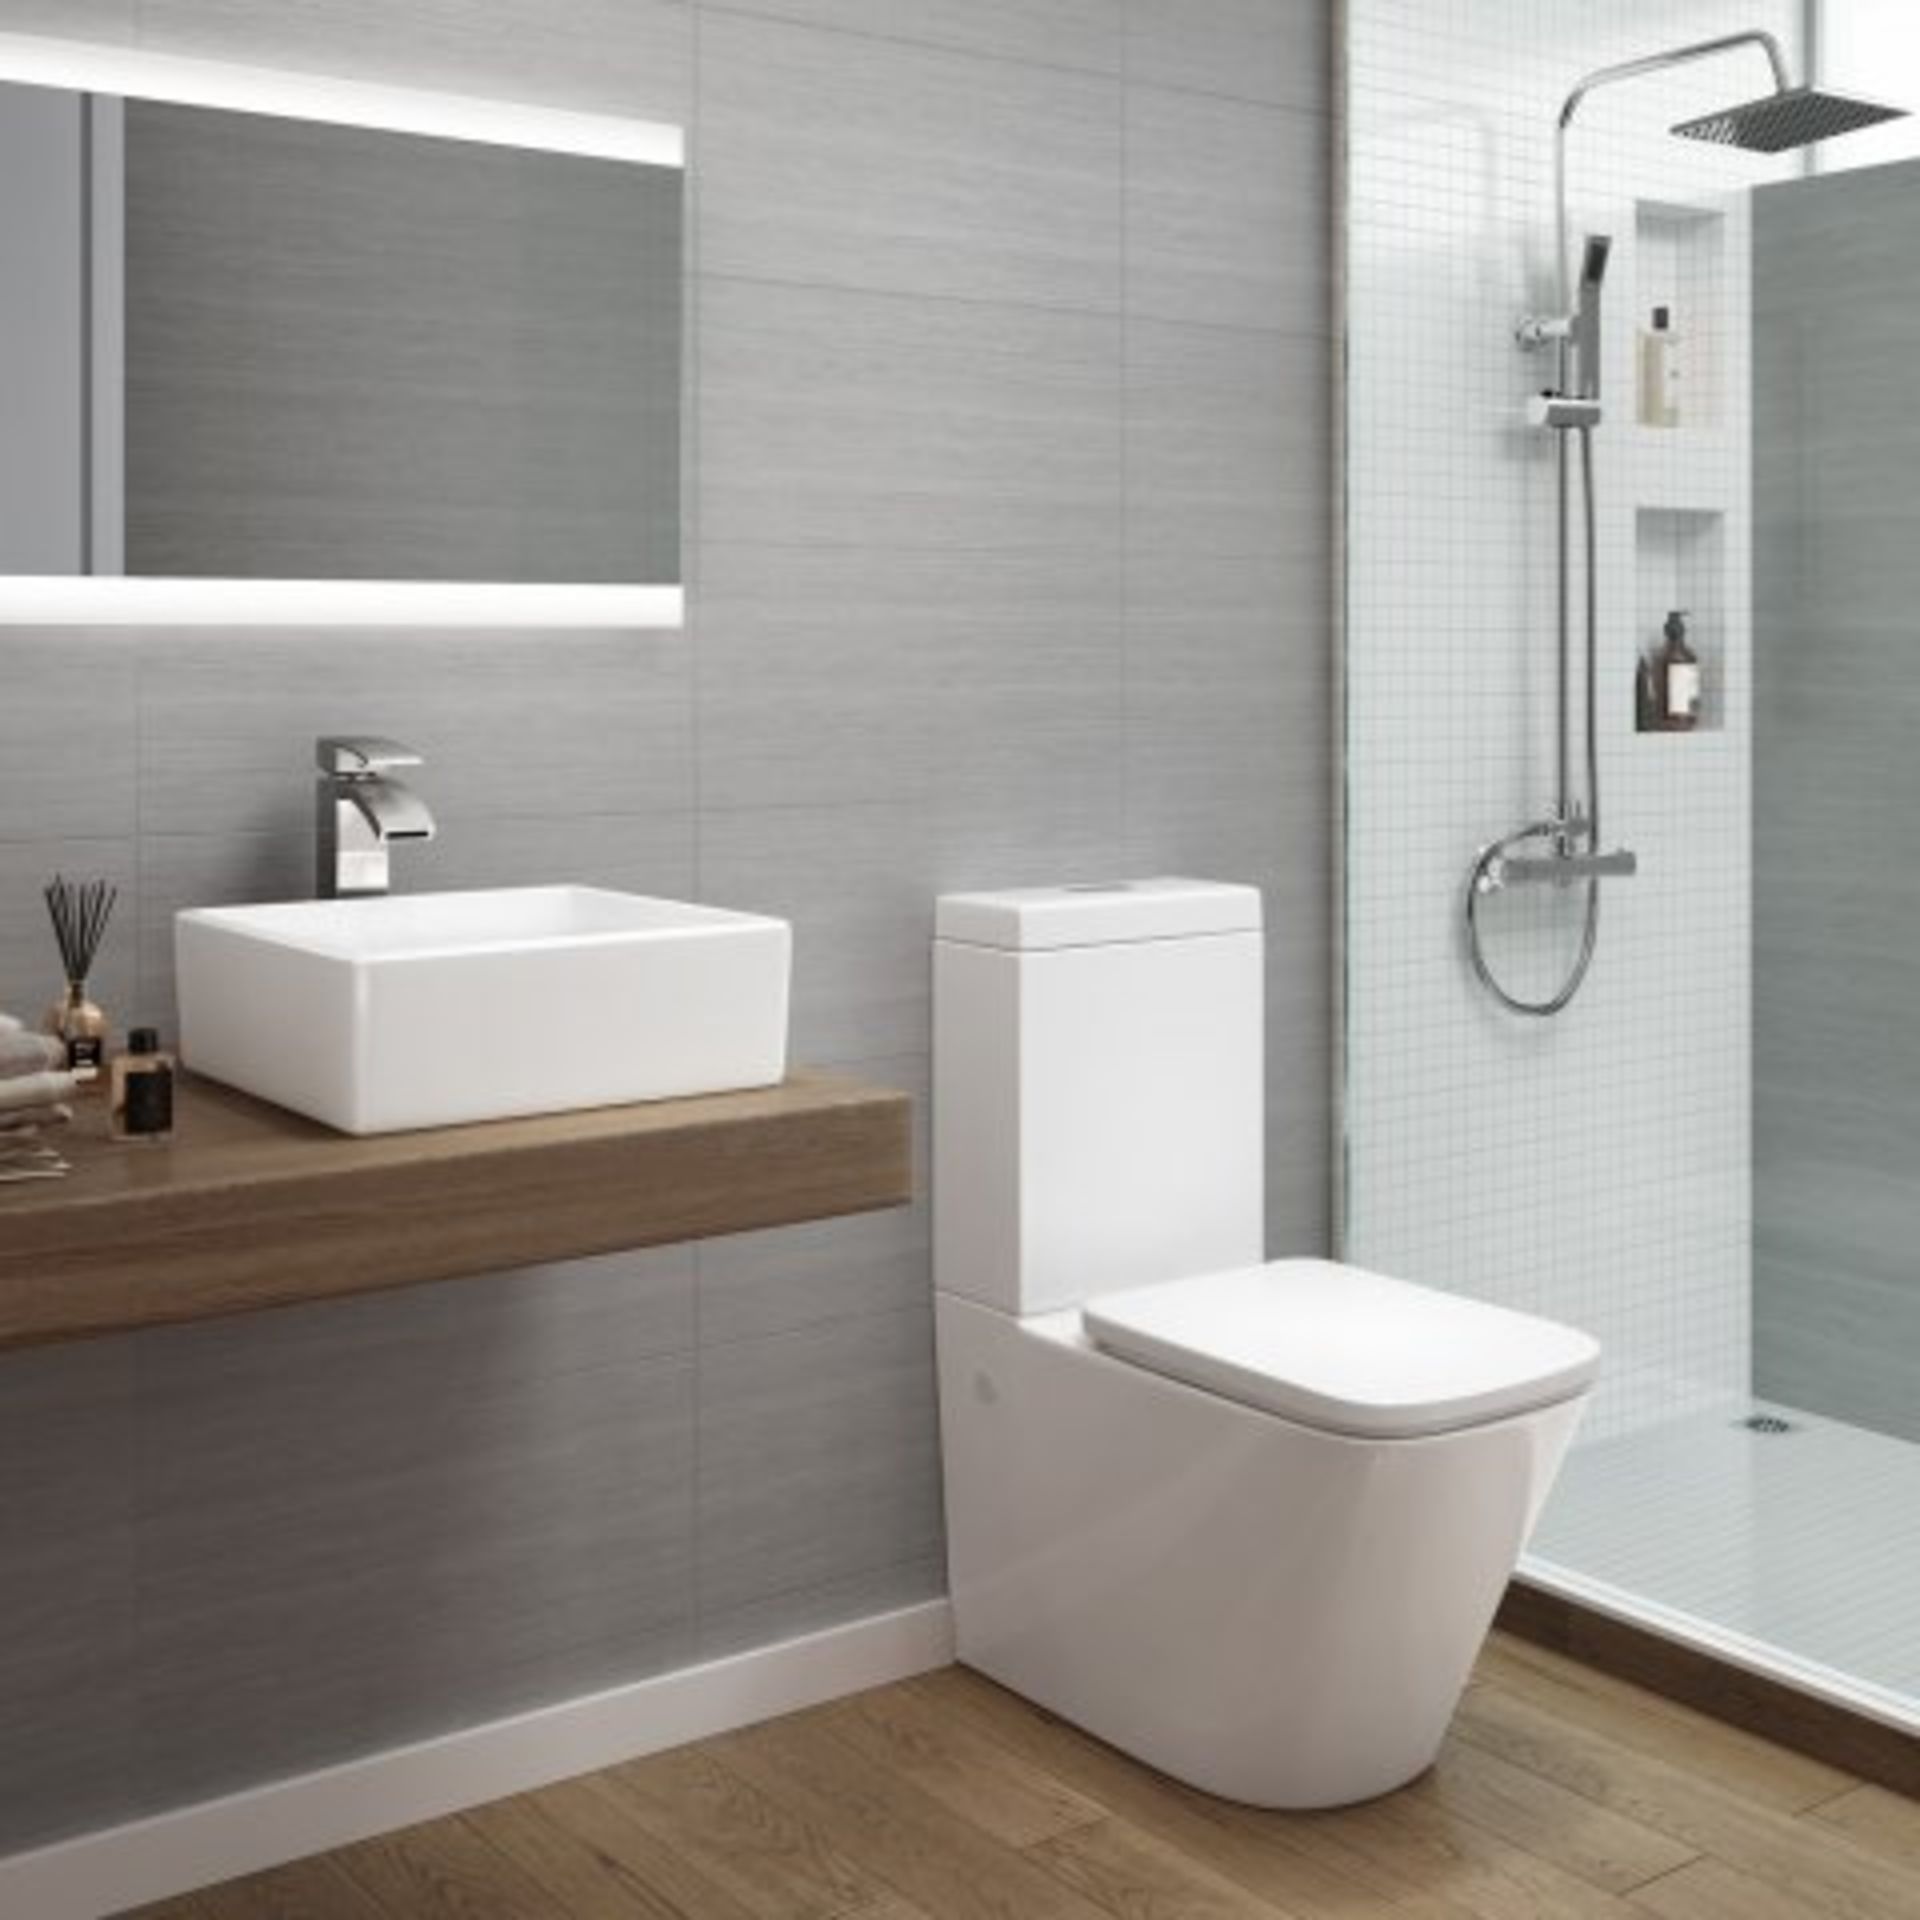 (O54) Florence Close Coupled Toilet & Cistern inc Soft Close Seat. RRP £399.99. Long Lasting Quality - Image 2 of 4